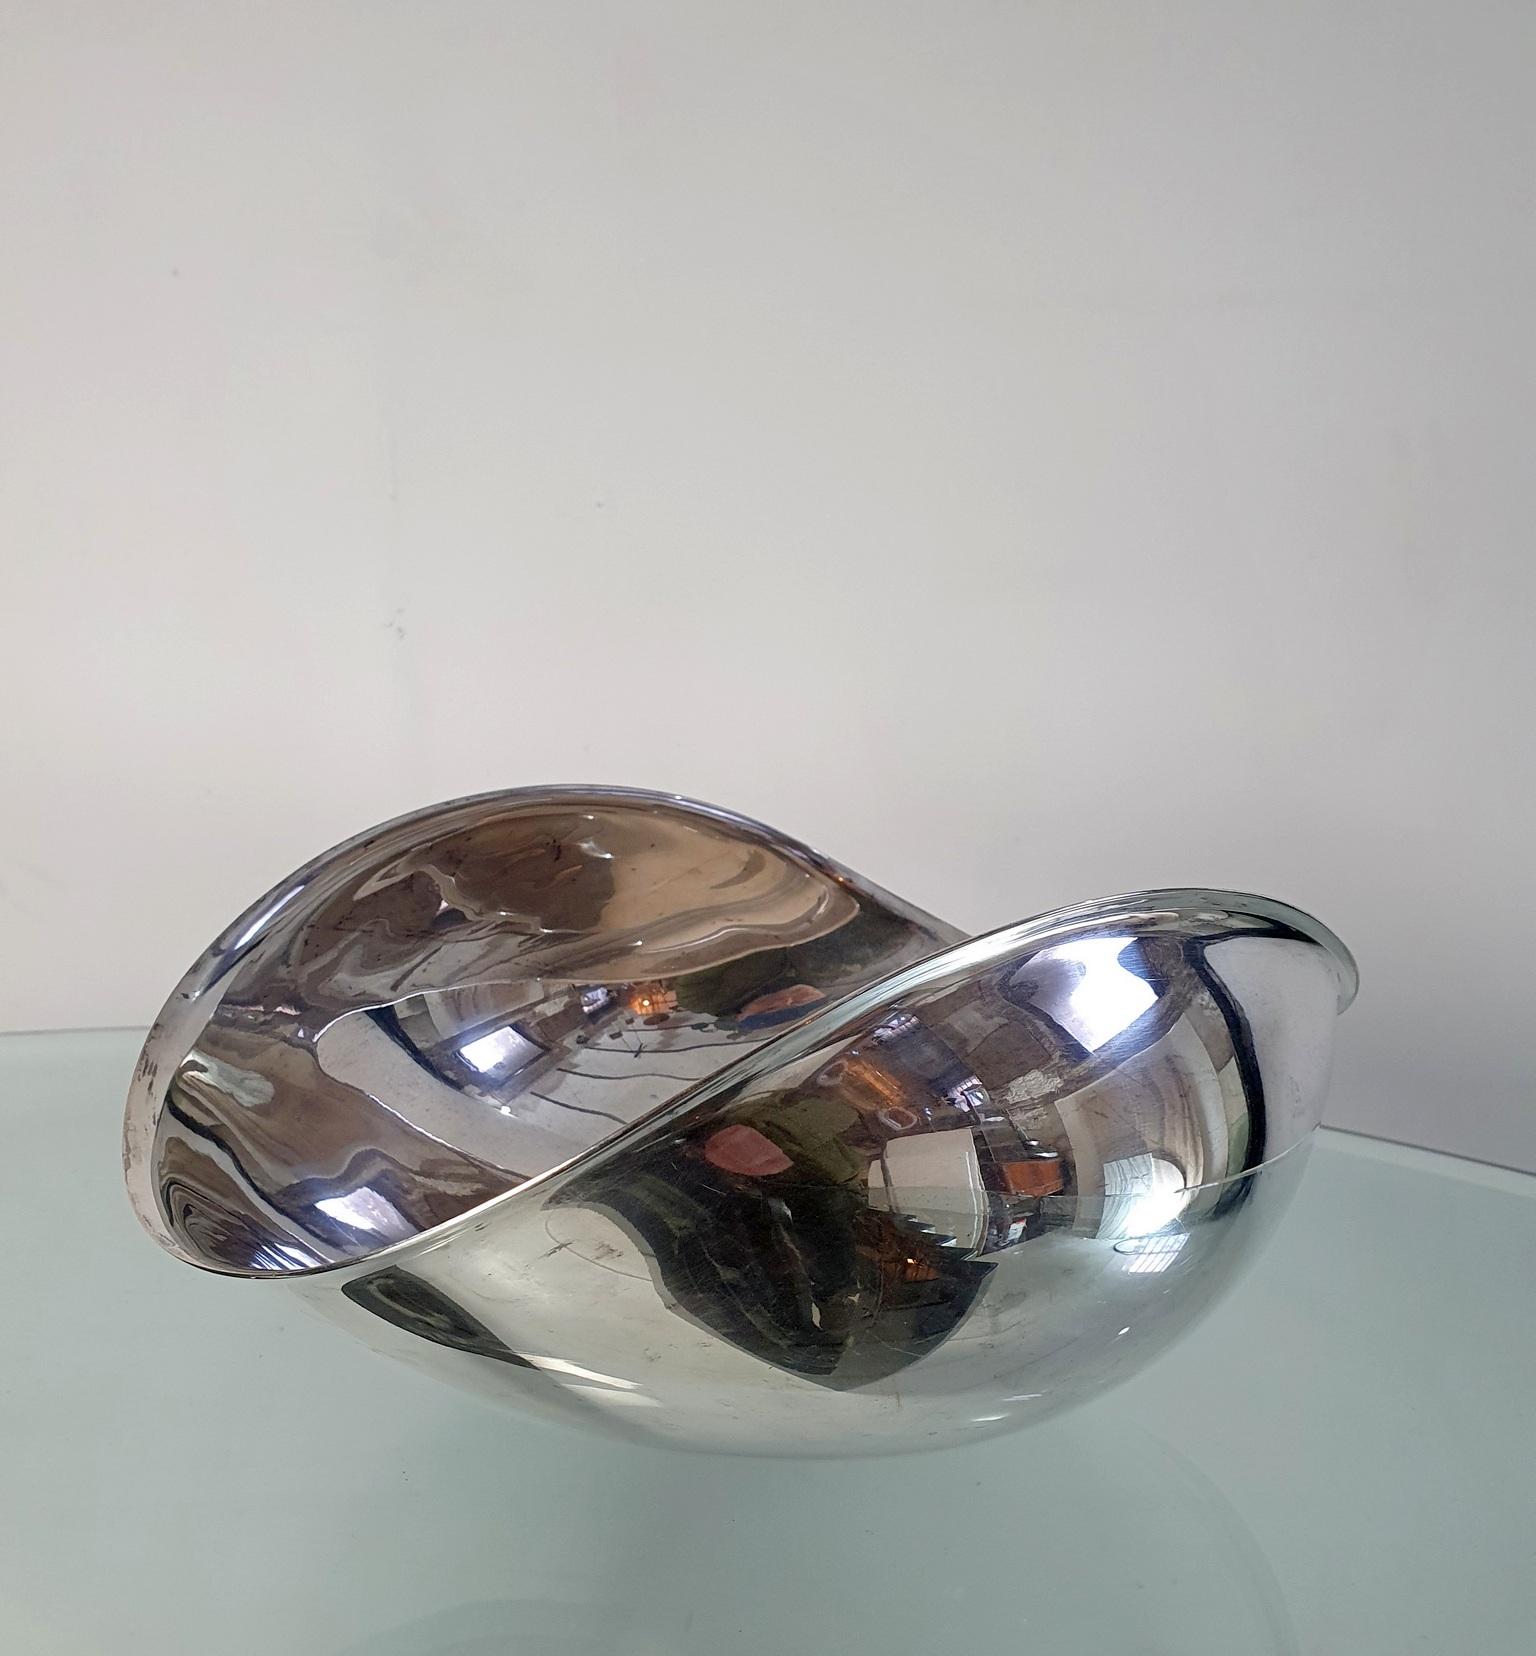 A bowl with the name Candara with a simplistic and iconic design by renowned italian designer Lino Sabattini from circa 1970. The condition is good albeit with some wear (see pictures). 

Lino Sabattini was born in Correggio (Reggio Emilia) the